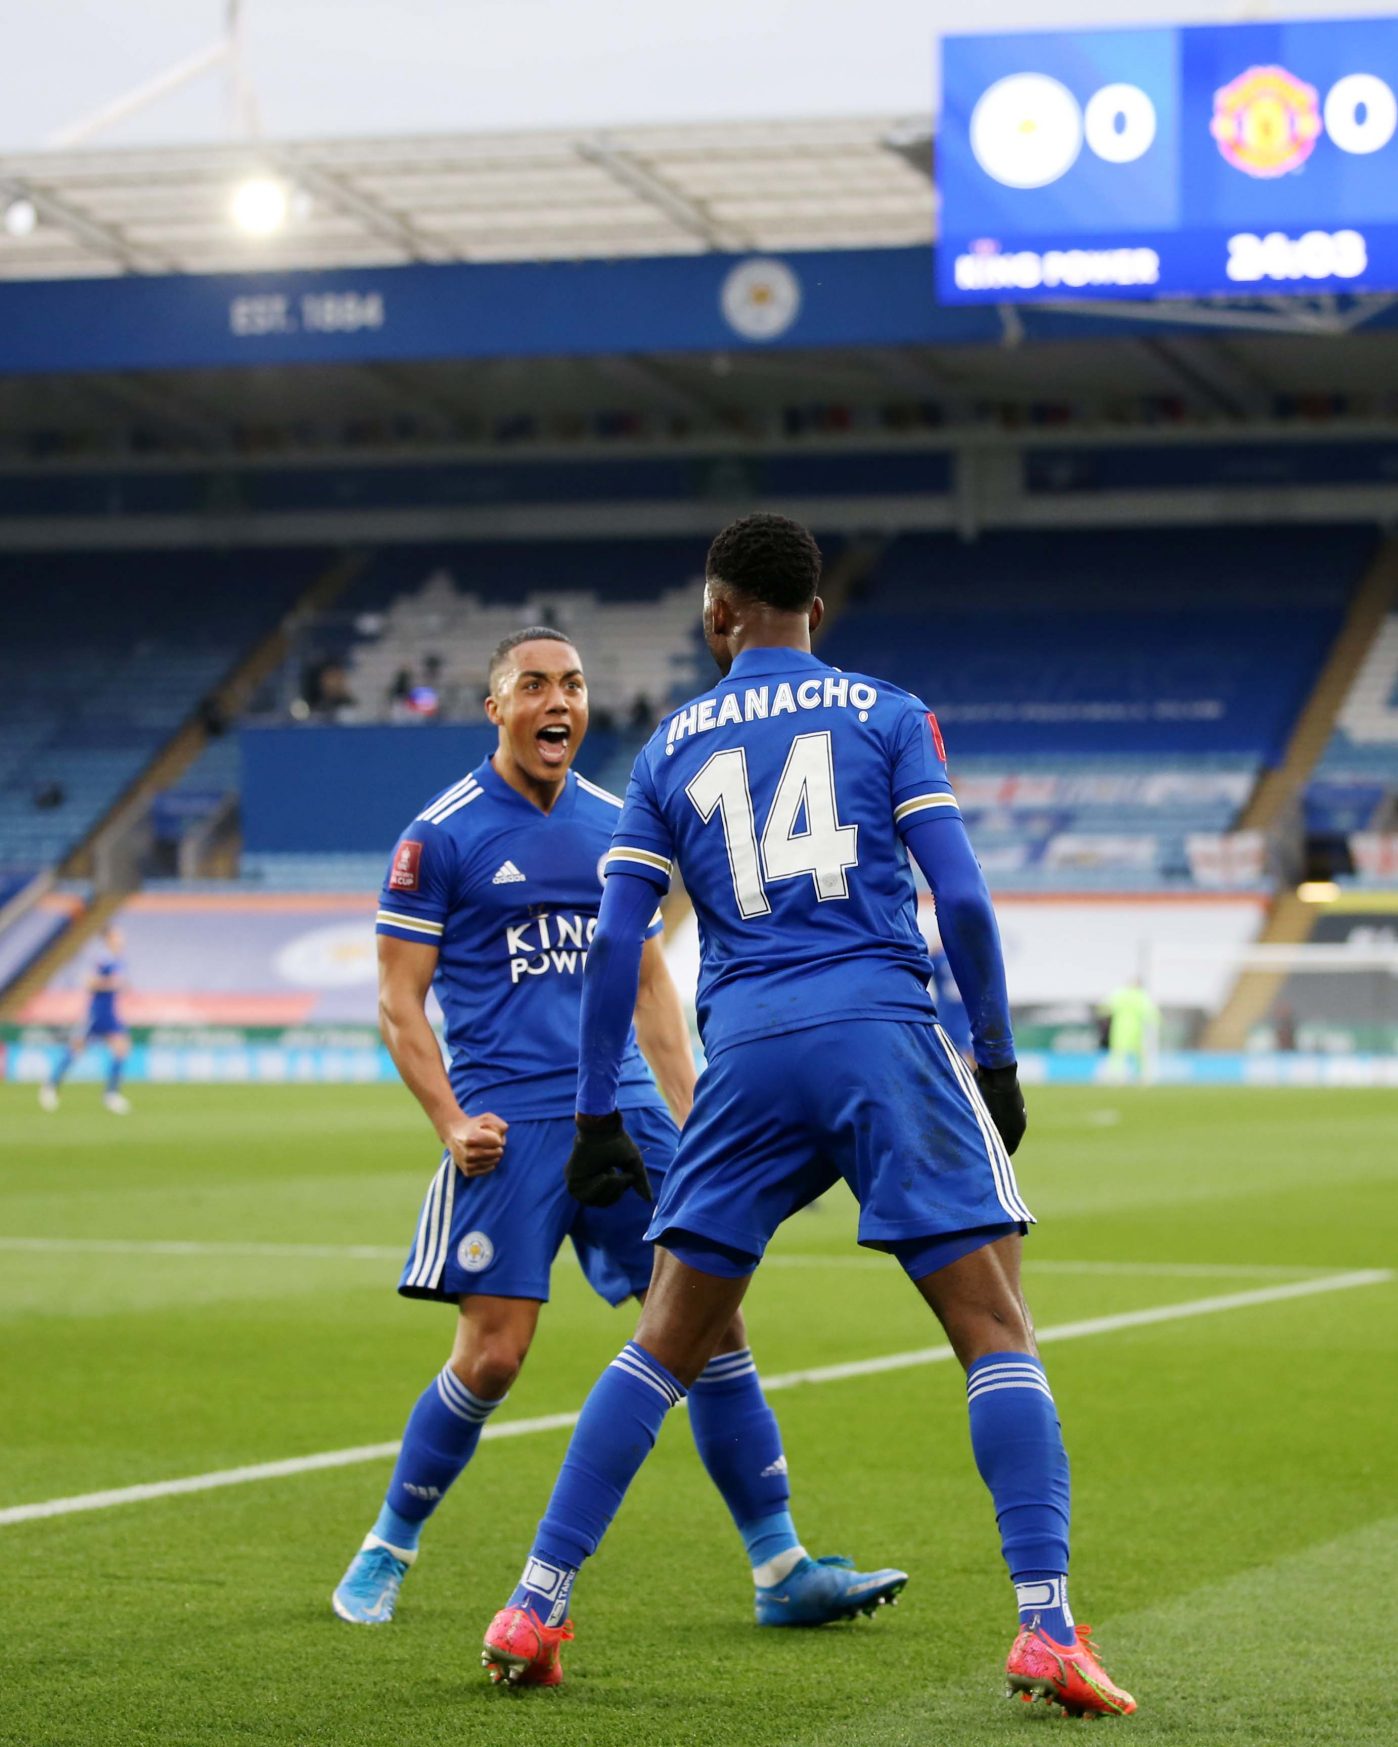 FA Cup Quarter-Final between Leicester City and Manchester United